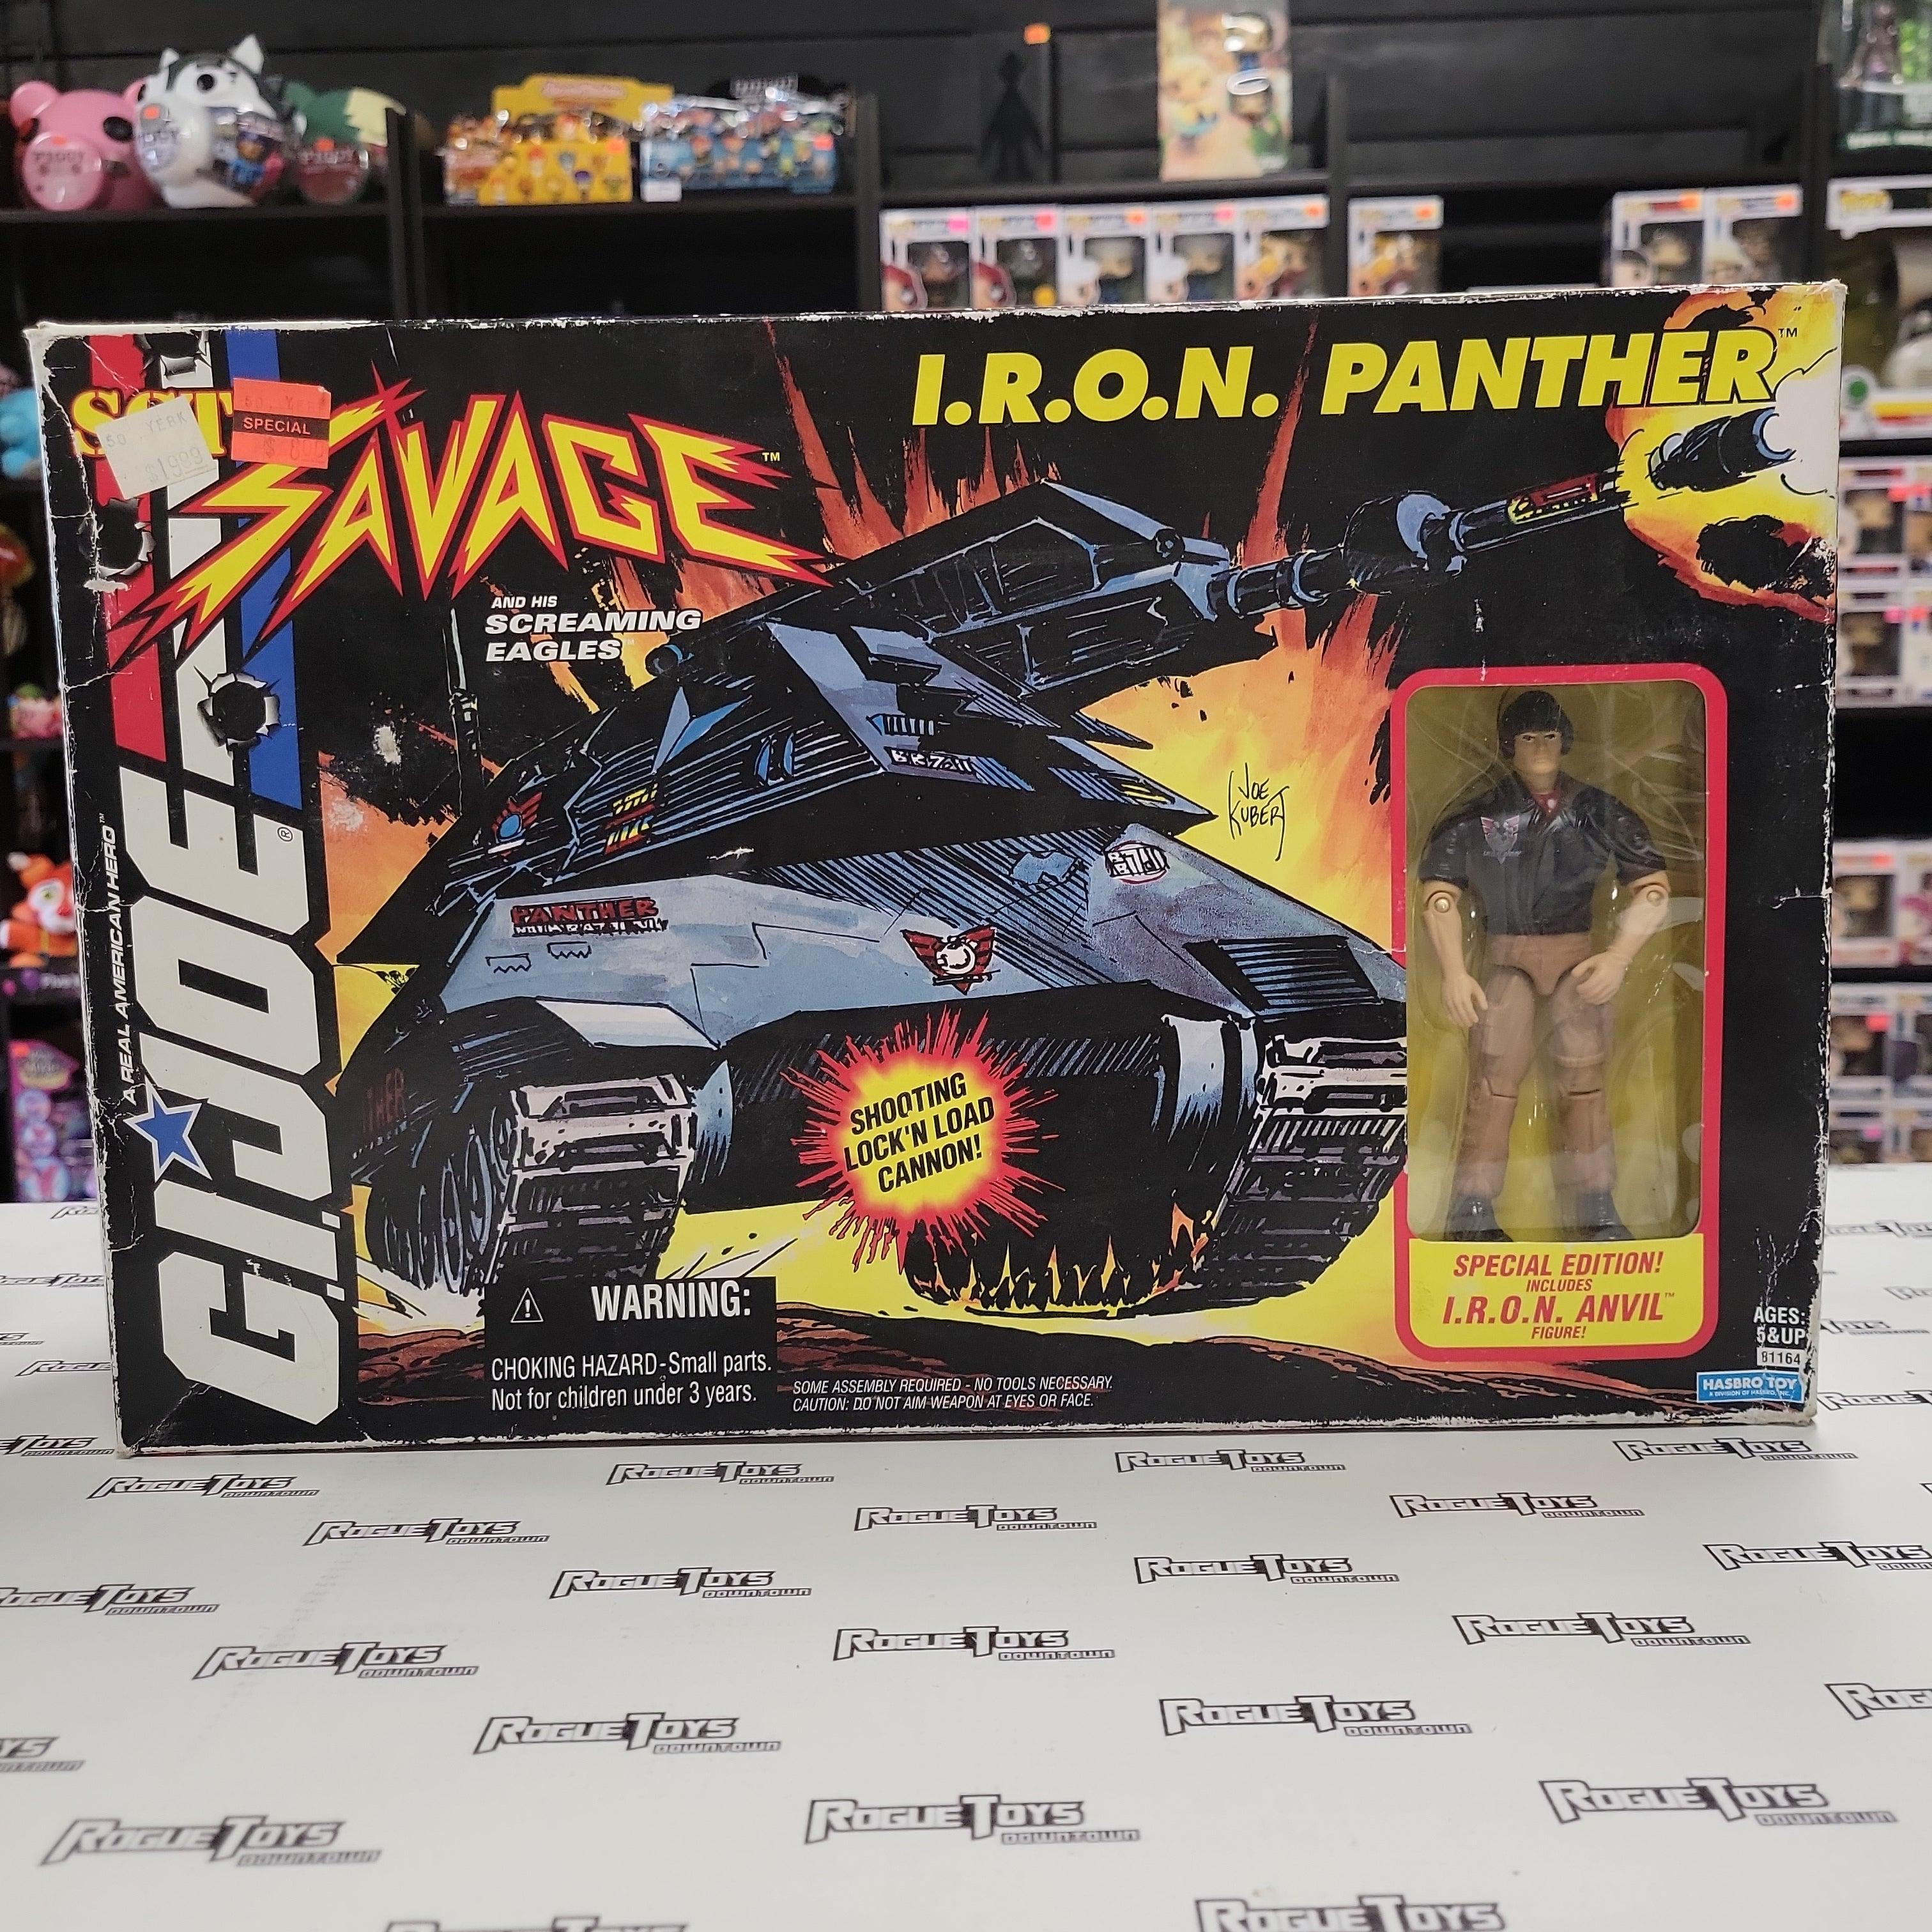 HASBRO (1994) G.I. Joe, Sgt. Savage & His Screaming Eagles IRON Panther with Special Edition IRON Anvil Figure - Rogue Toys